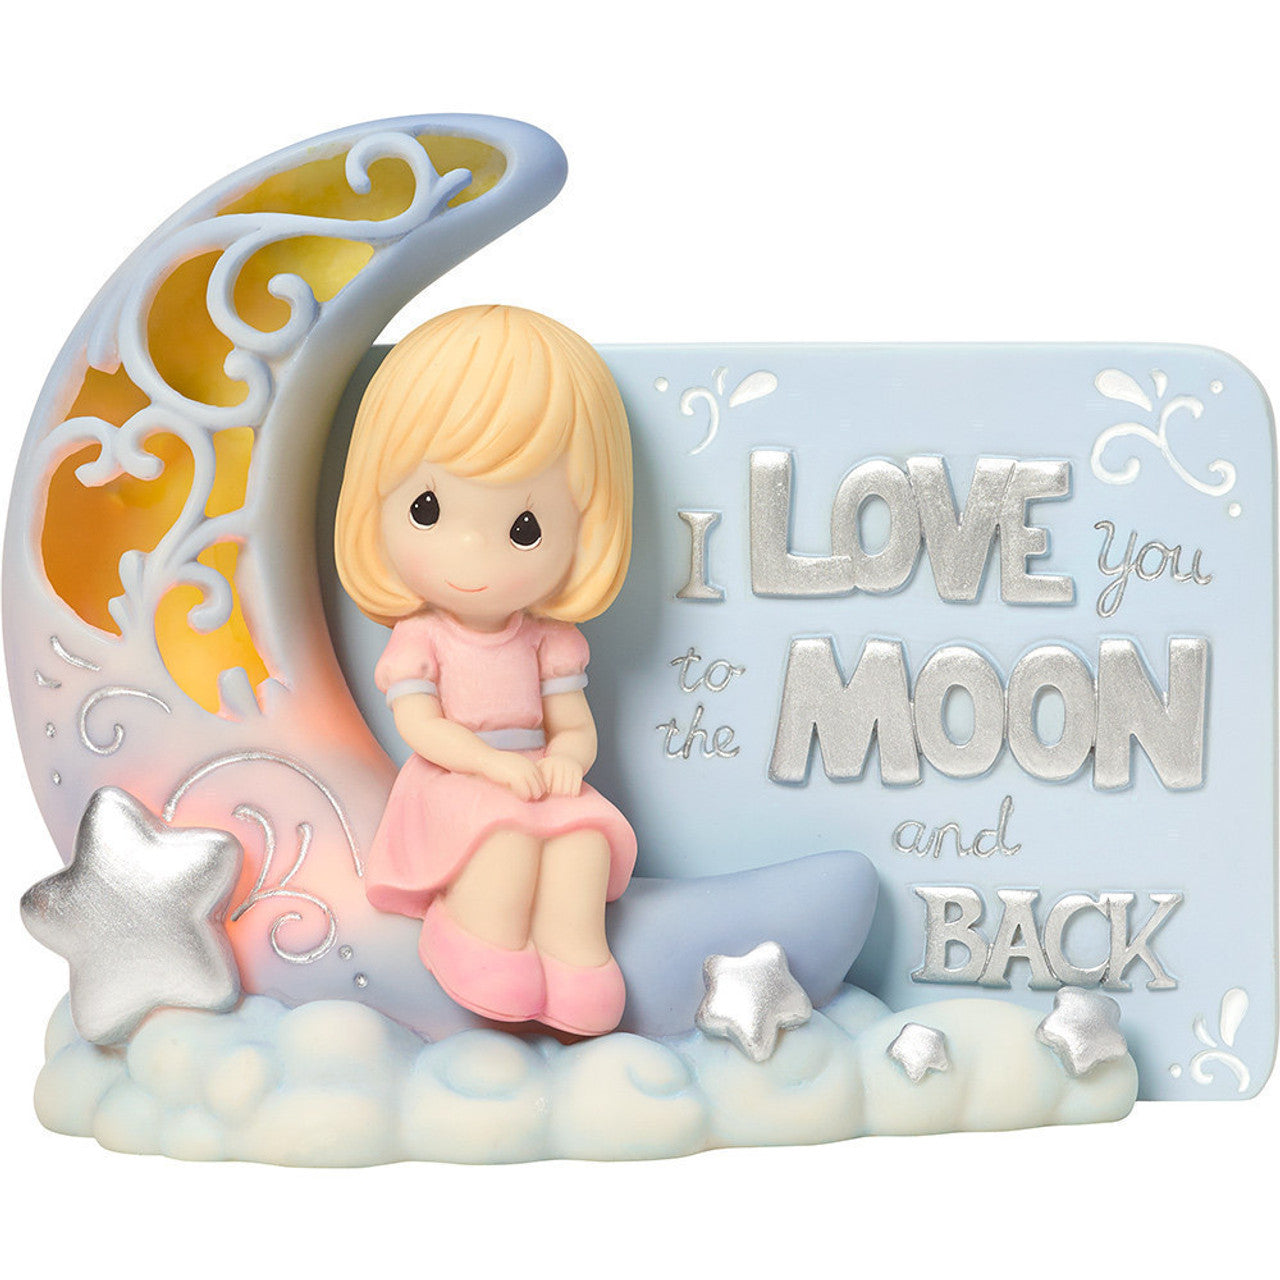 I Love You To The Moon And Back, Lighted Resin Figurine